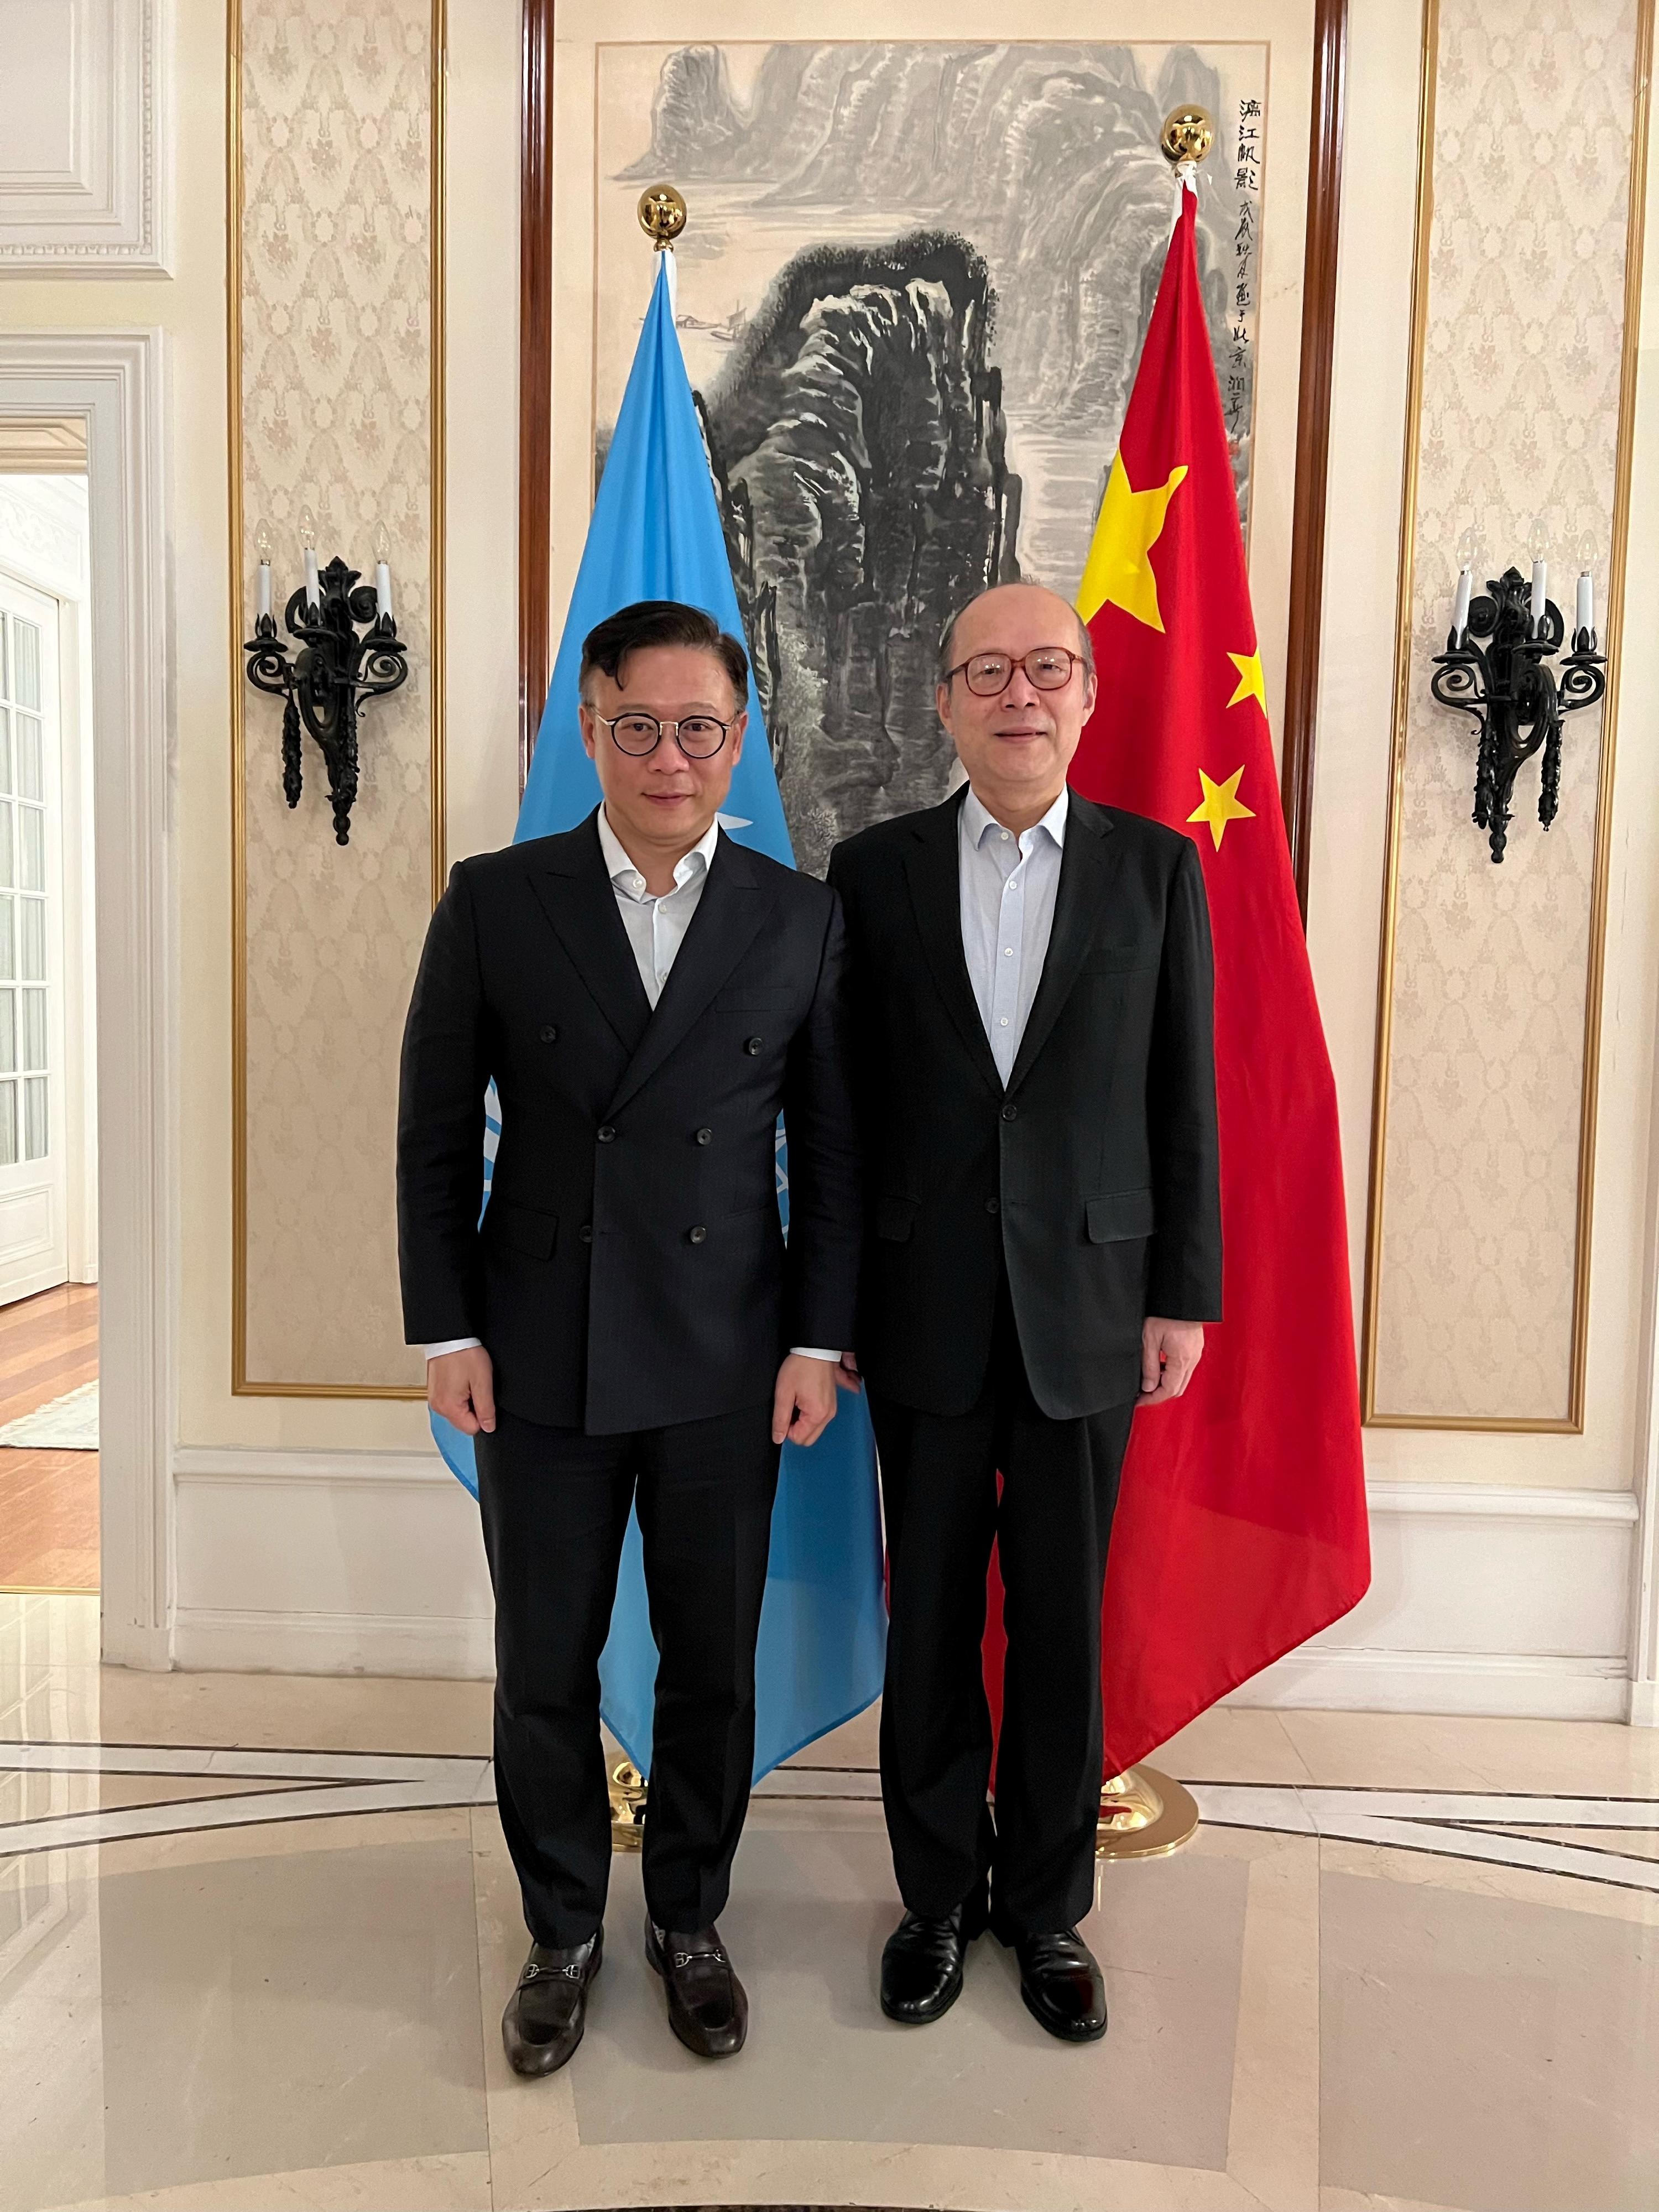 The Deputy Secretary for Justice, Mr Cheung Kwok-kwan (left), called on the Ambassador Extraordinary and Plenipotentiary, Permanent Representative of the People's Republic of China to the United Nations Office at Geneva and other International Organizations in Switzerland, Mr Chen Xu (right), in Geneva, Switzerland, on March 19 (Geneva time).

